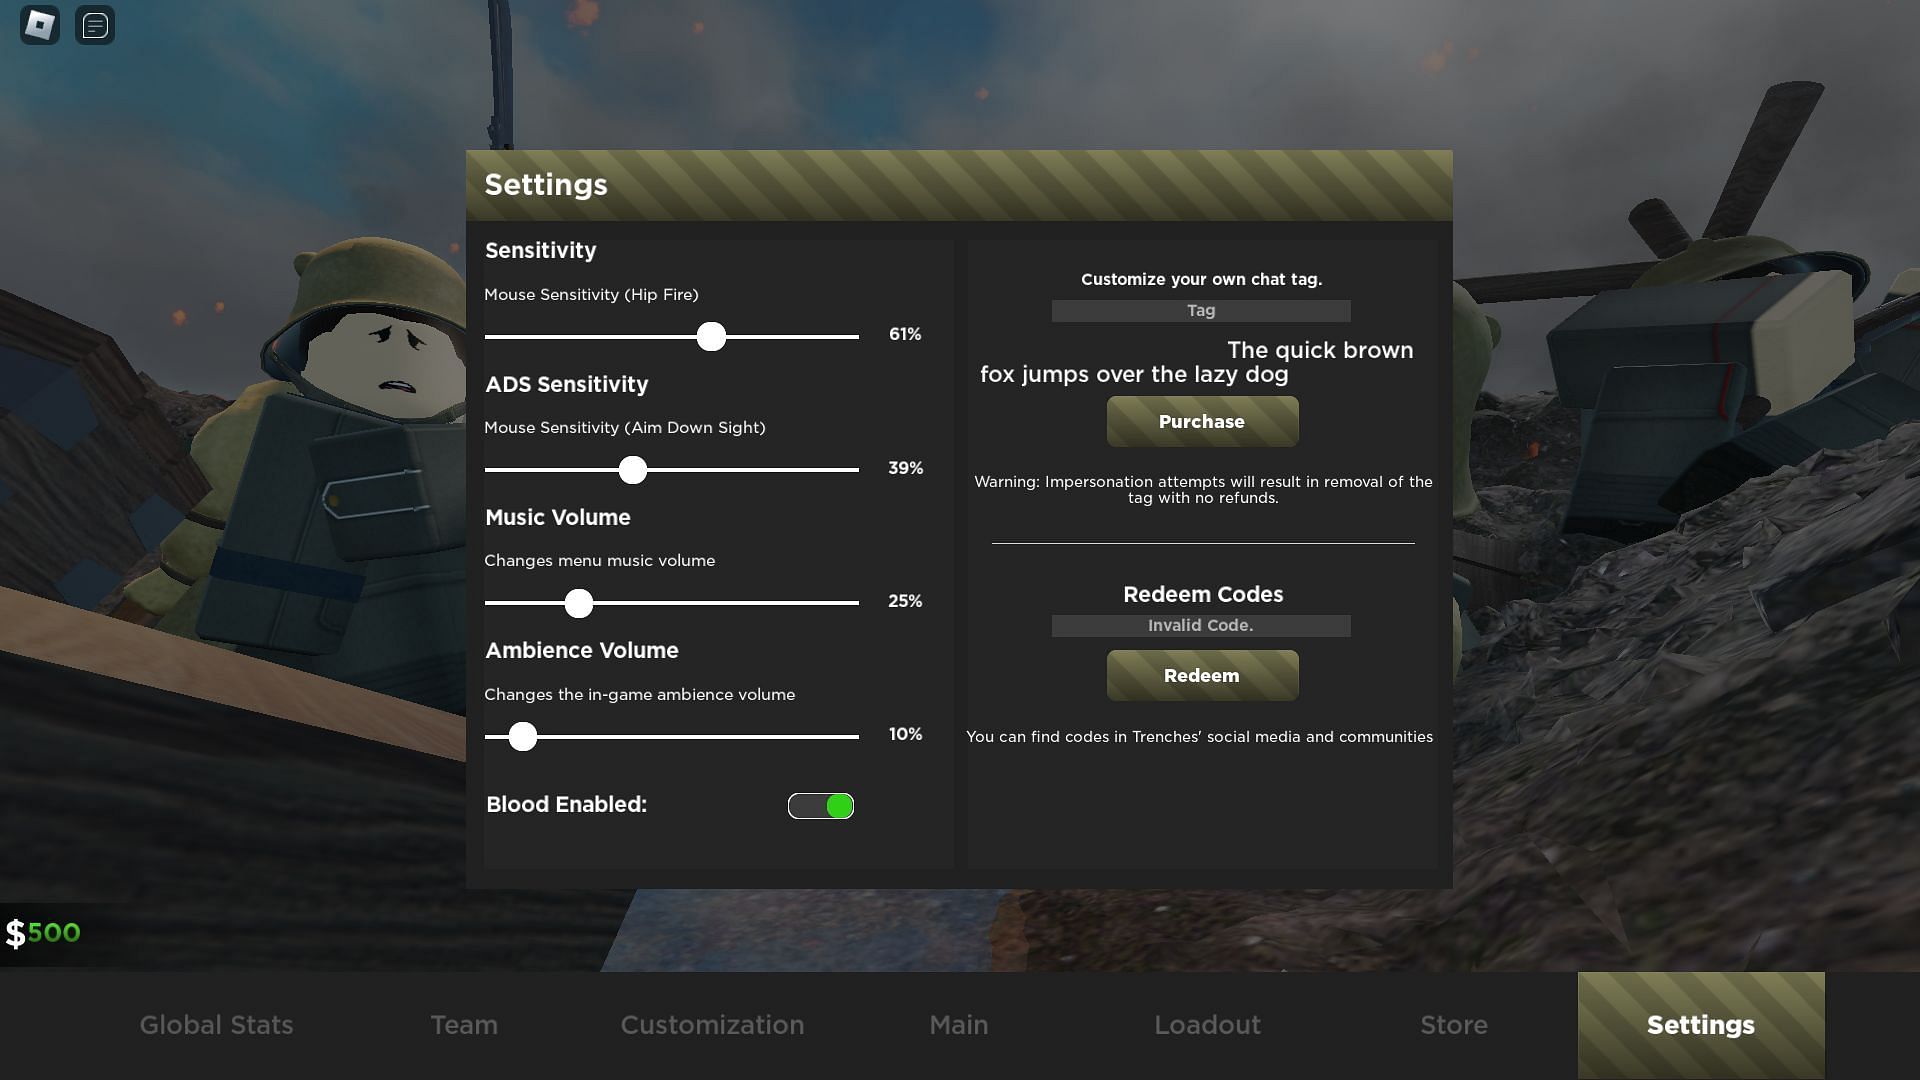 Troubleshooting codes for Trenches (Image via Roblox)